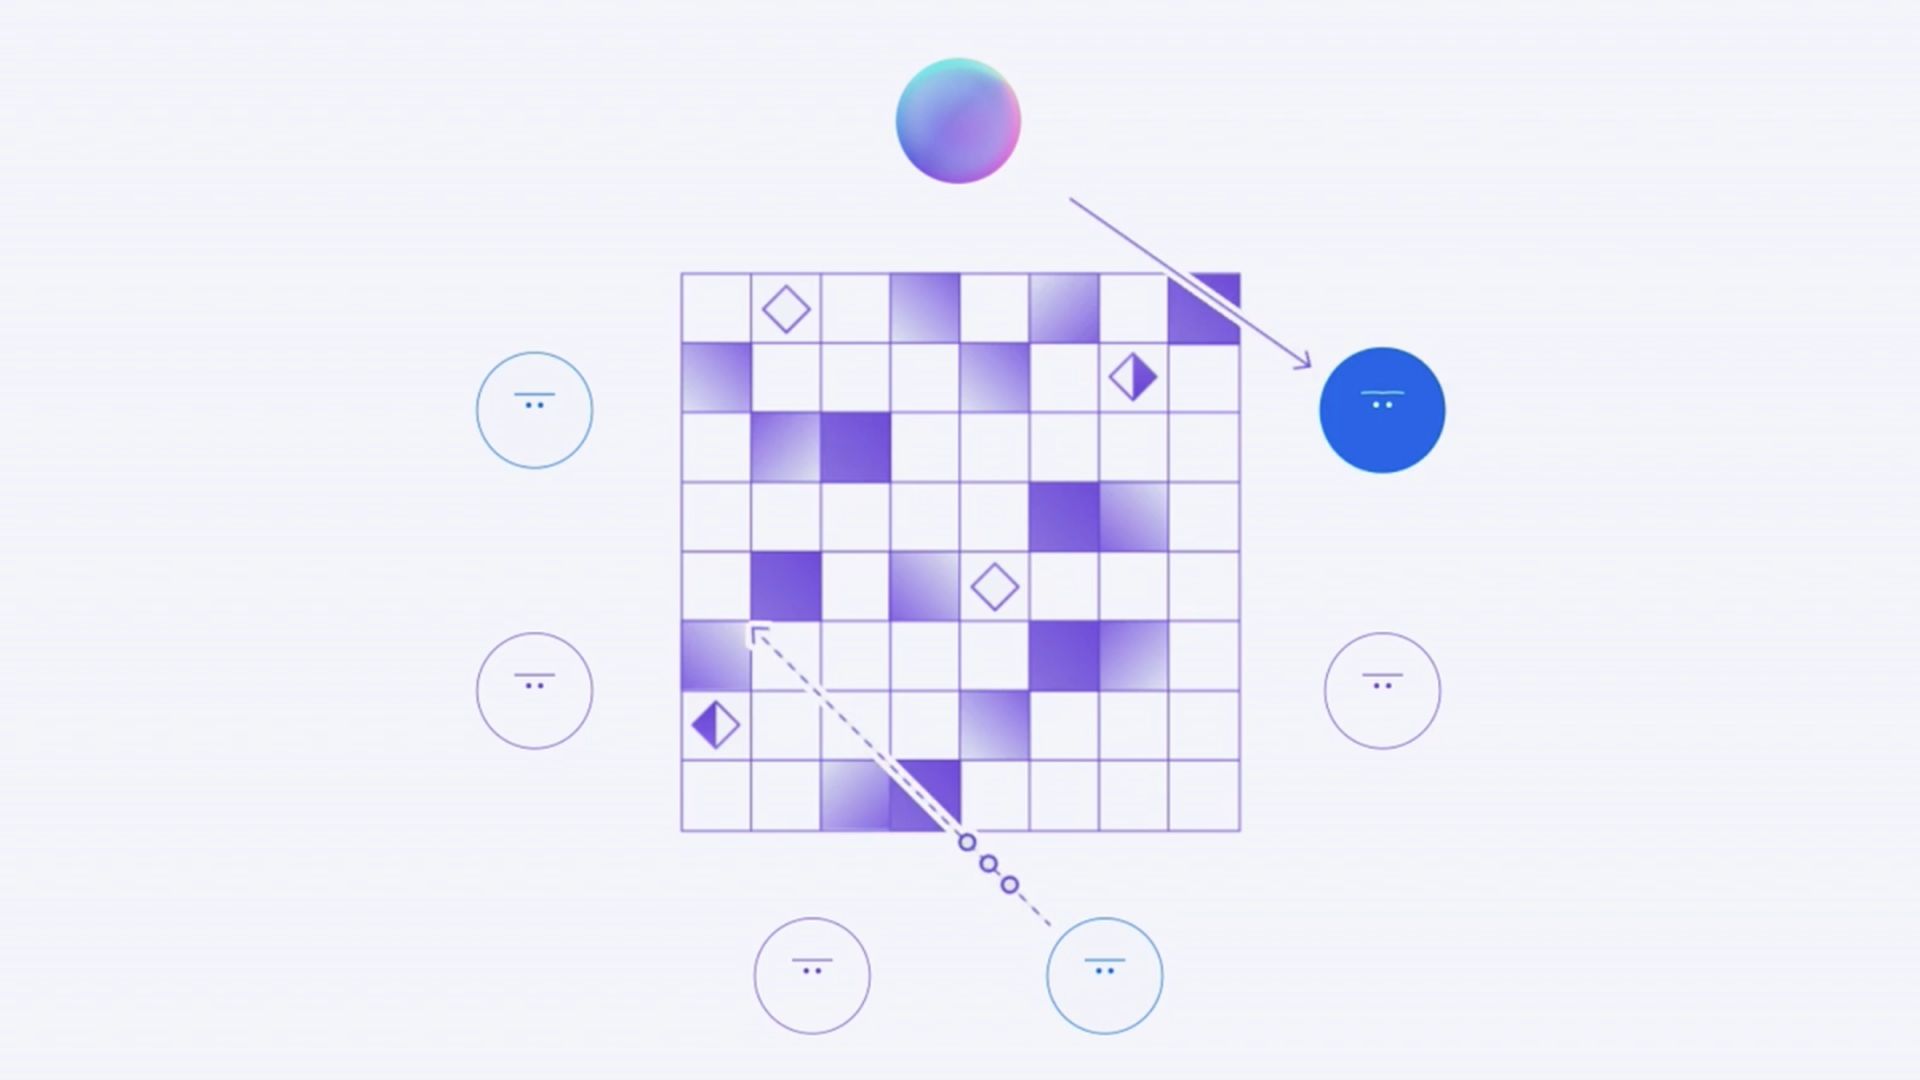 Meta Cicero AI achieves human-level performance in board game Diplomacy